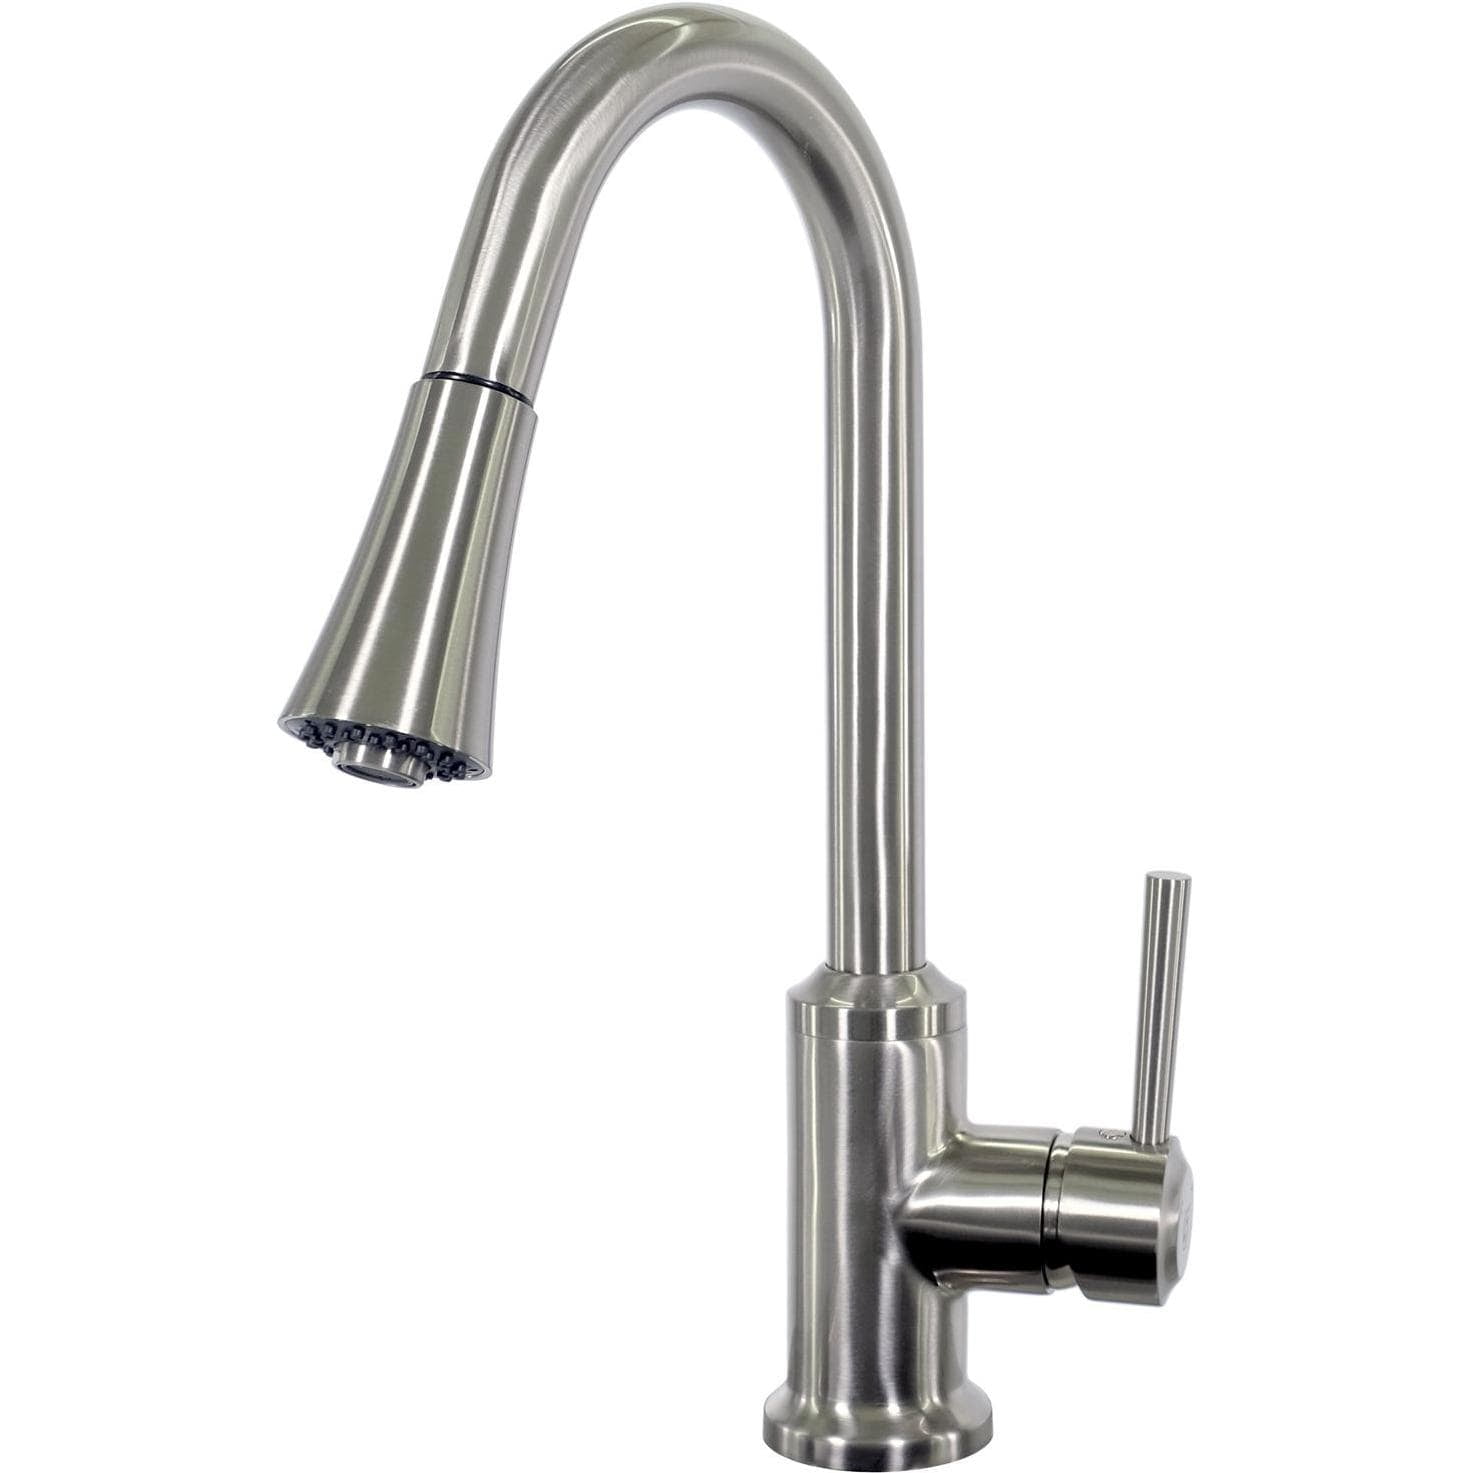 BBQGuys Signature Single Handle Pull-Down Gooseneck Hot/Cold Faucet